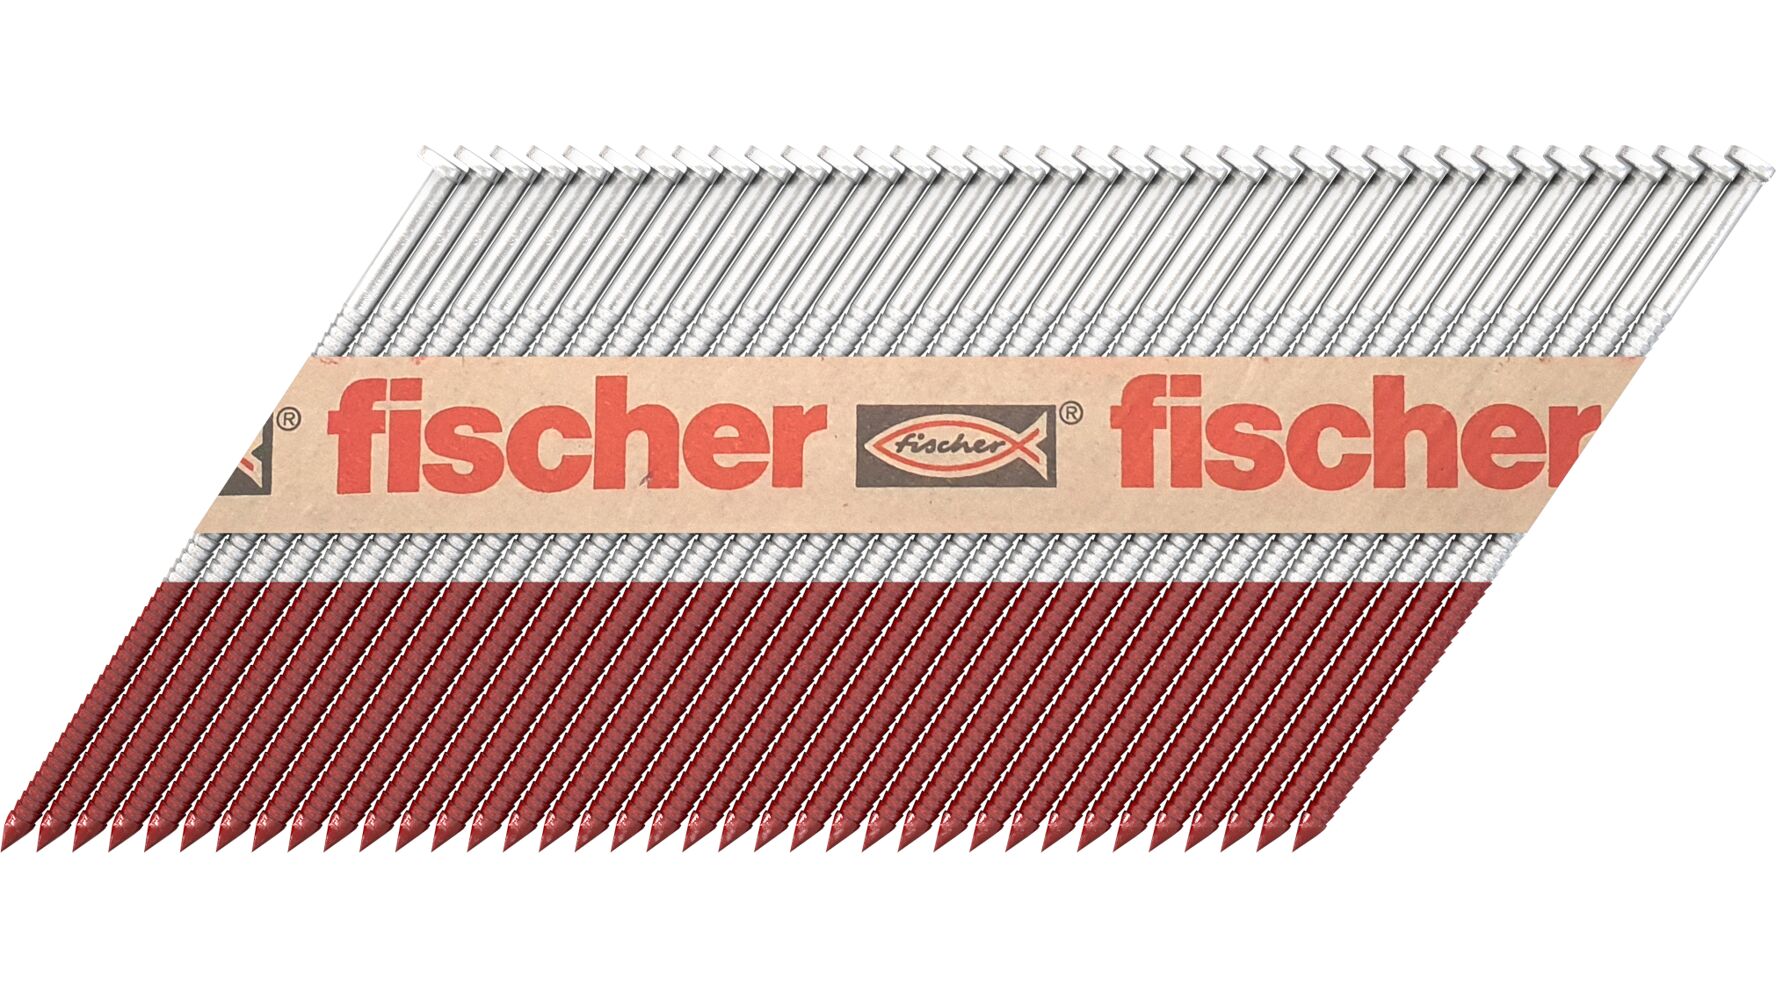 Fischer Collated Nails Ring Shank FF NFP - Hot Dipped Galvanised - 3 Fuel Cells